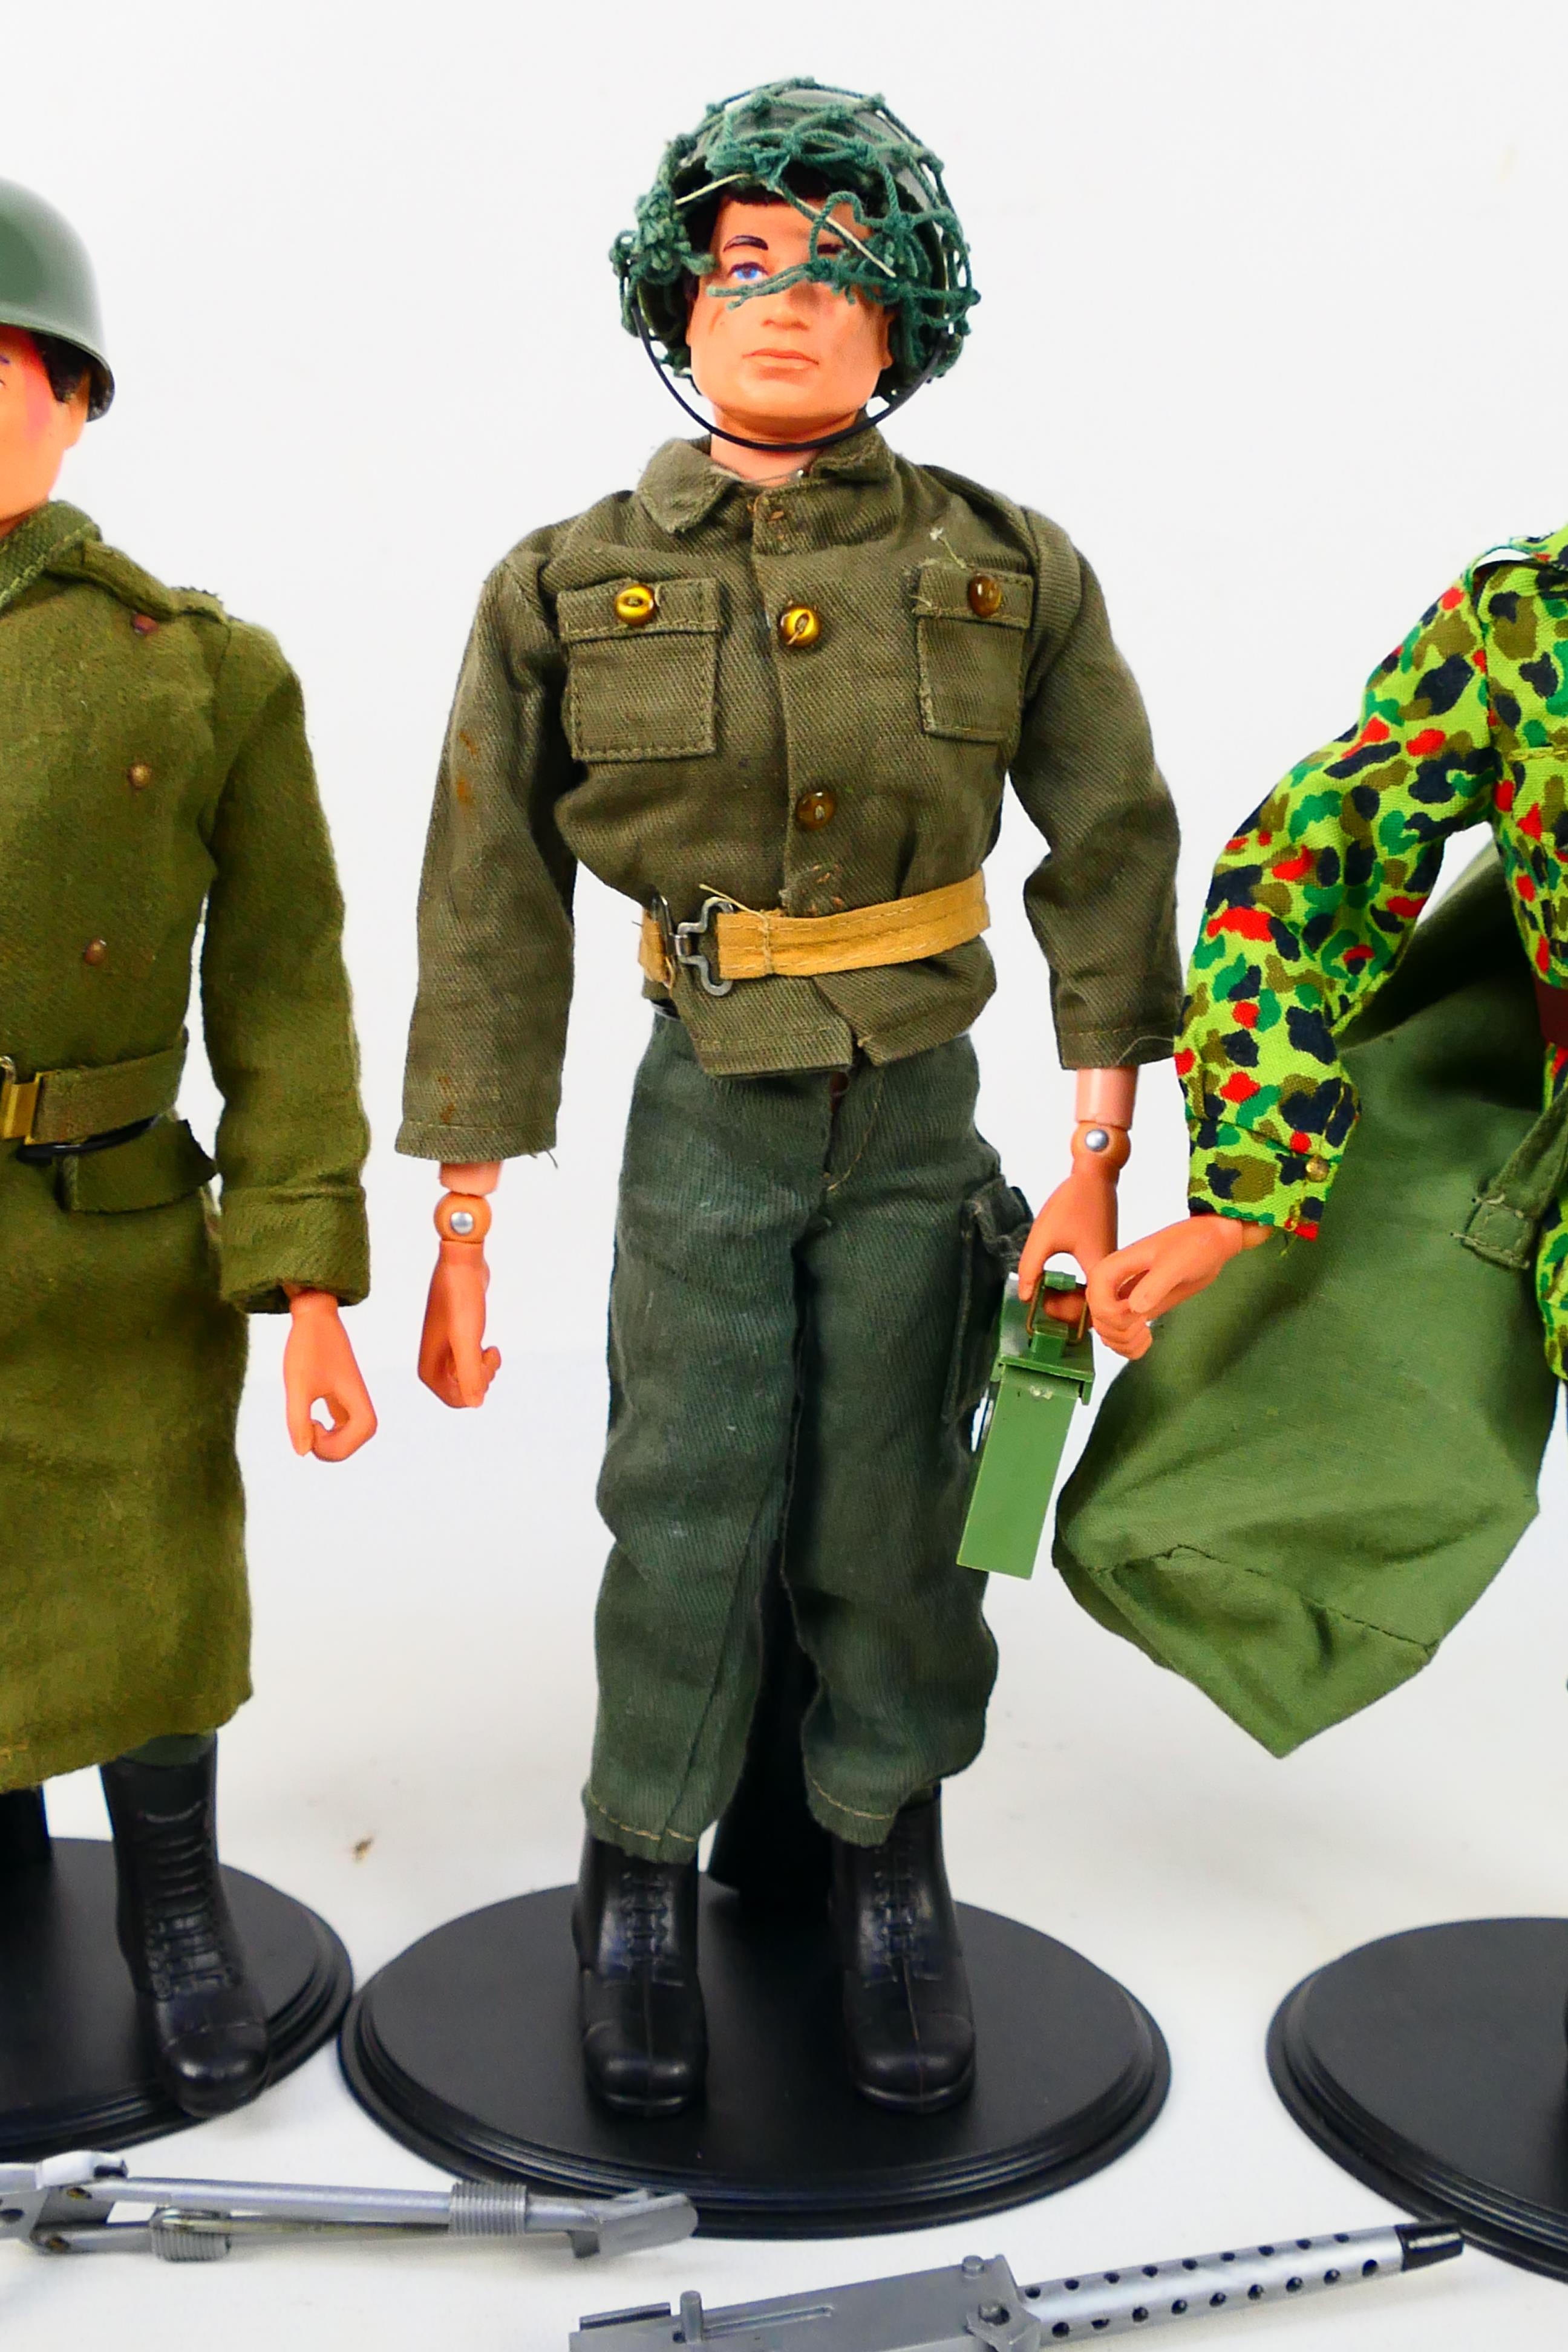 Palitoy - Action Man - 3 x vintage flock hair Action Man figures on stands. - Image 3 of 4